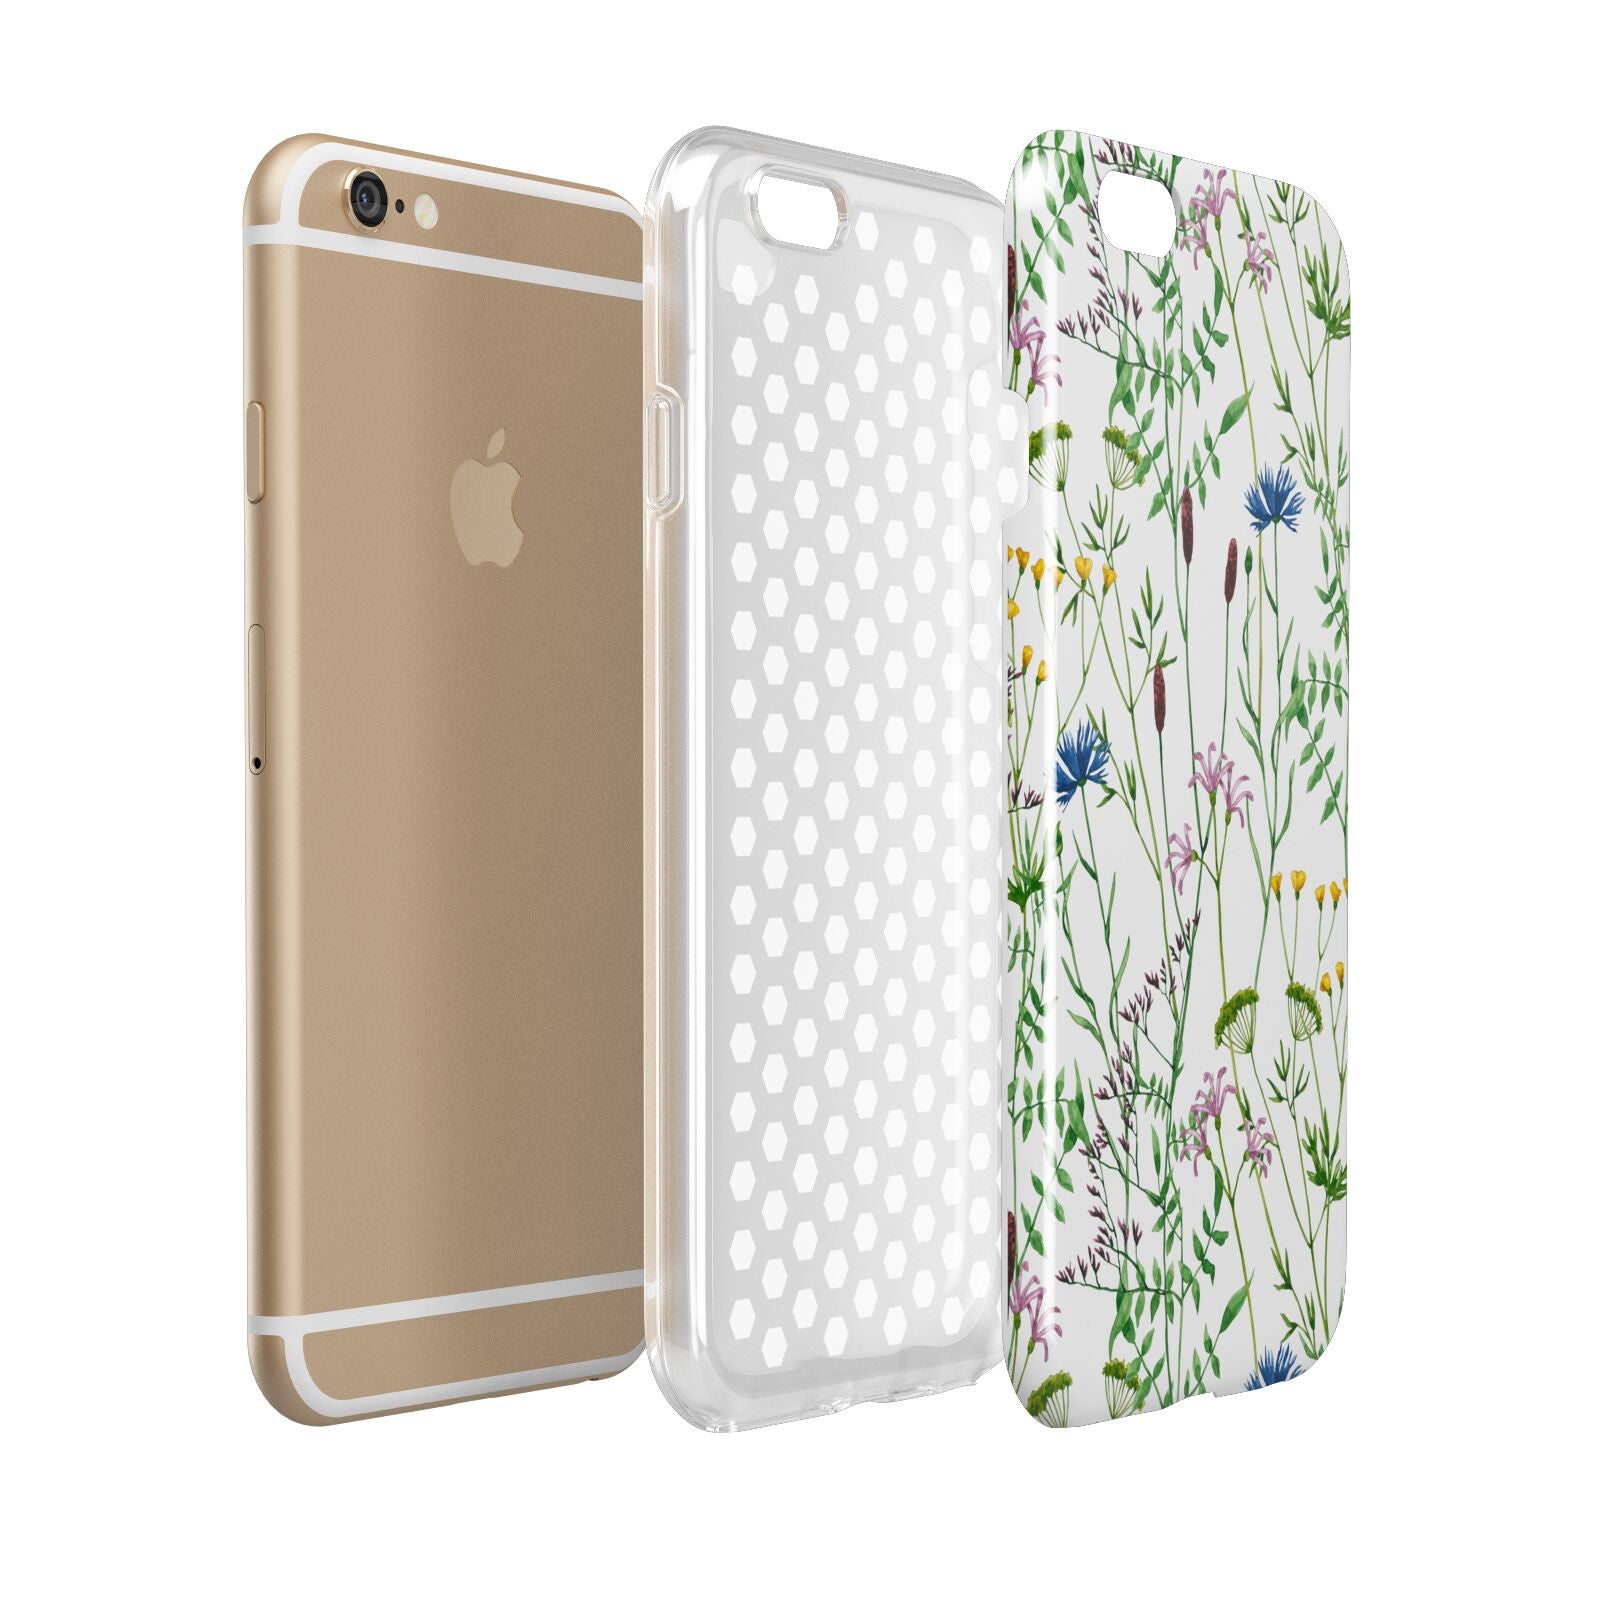 Wildflowers Apple iPhone 6 3D Tough Case Expanded view